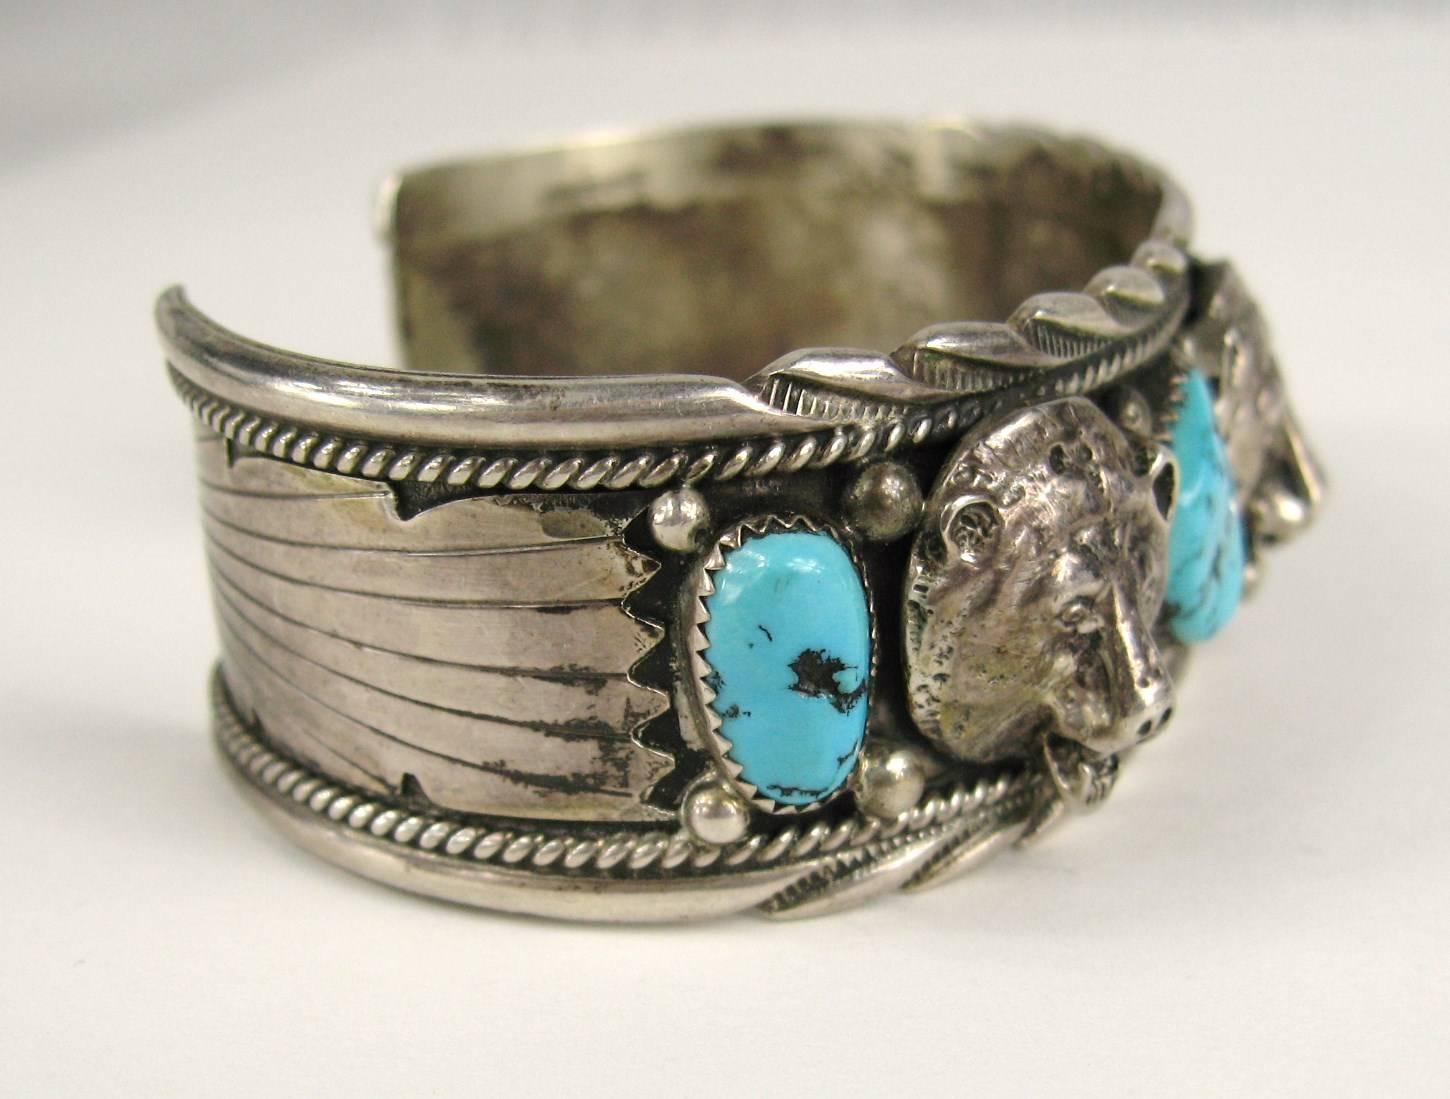 This Navajo Sleeping Beauty Bear Head Cuff features the classic image of the west. Blue Sleeping Beauty Turquoise. Four high-quality nuggets provide the spacing between the 3 heads. surrounded by a bounty of skillfully worked heavy gauge, Sterling